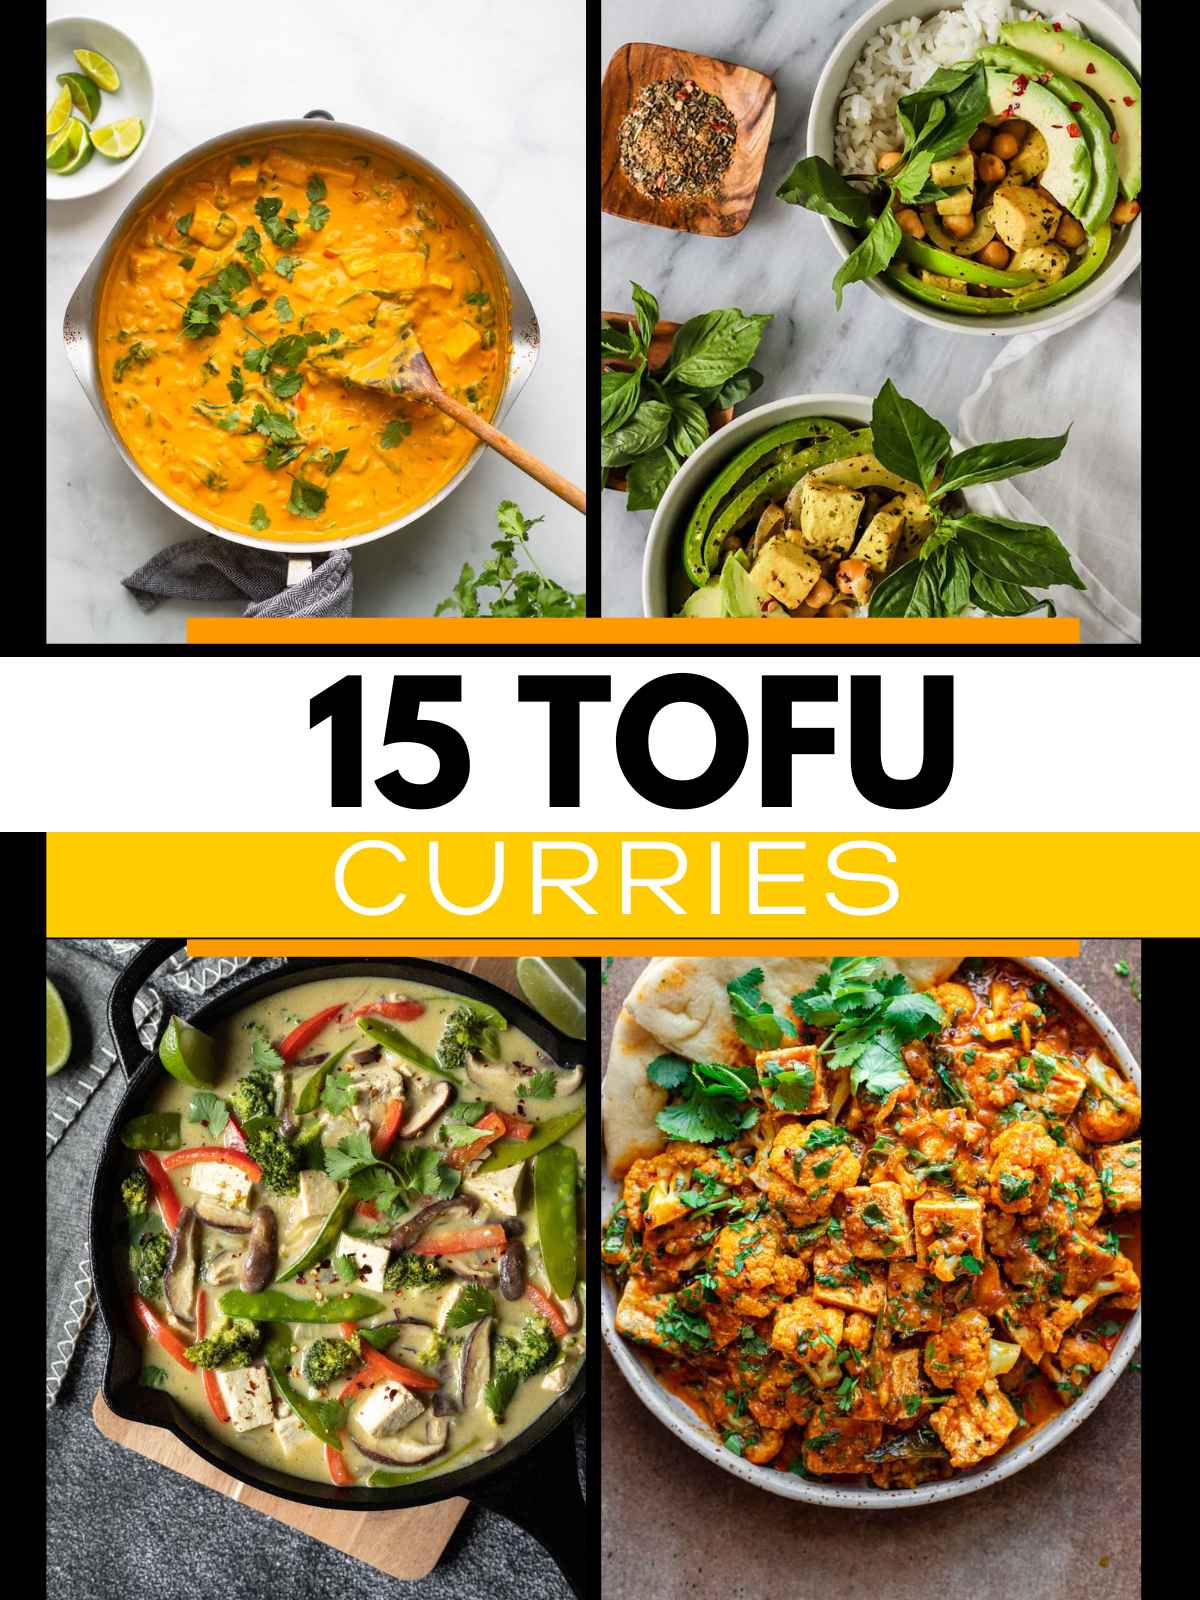 Collage of multiple tofu curry images. and text saying 15 Tofu Curries.